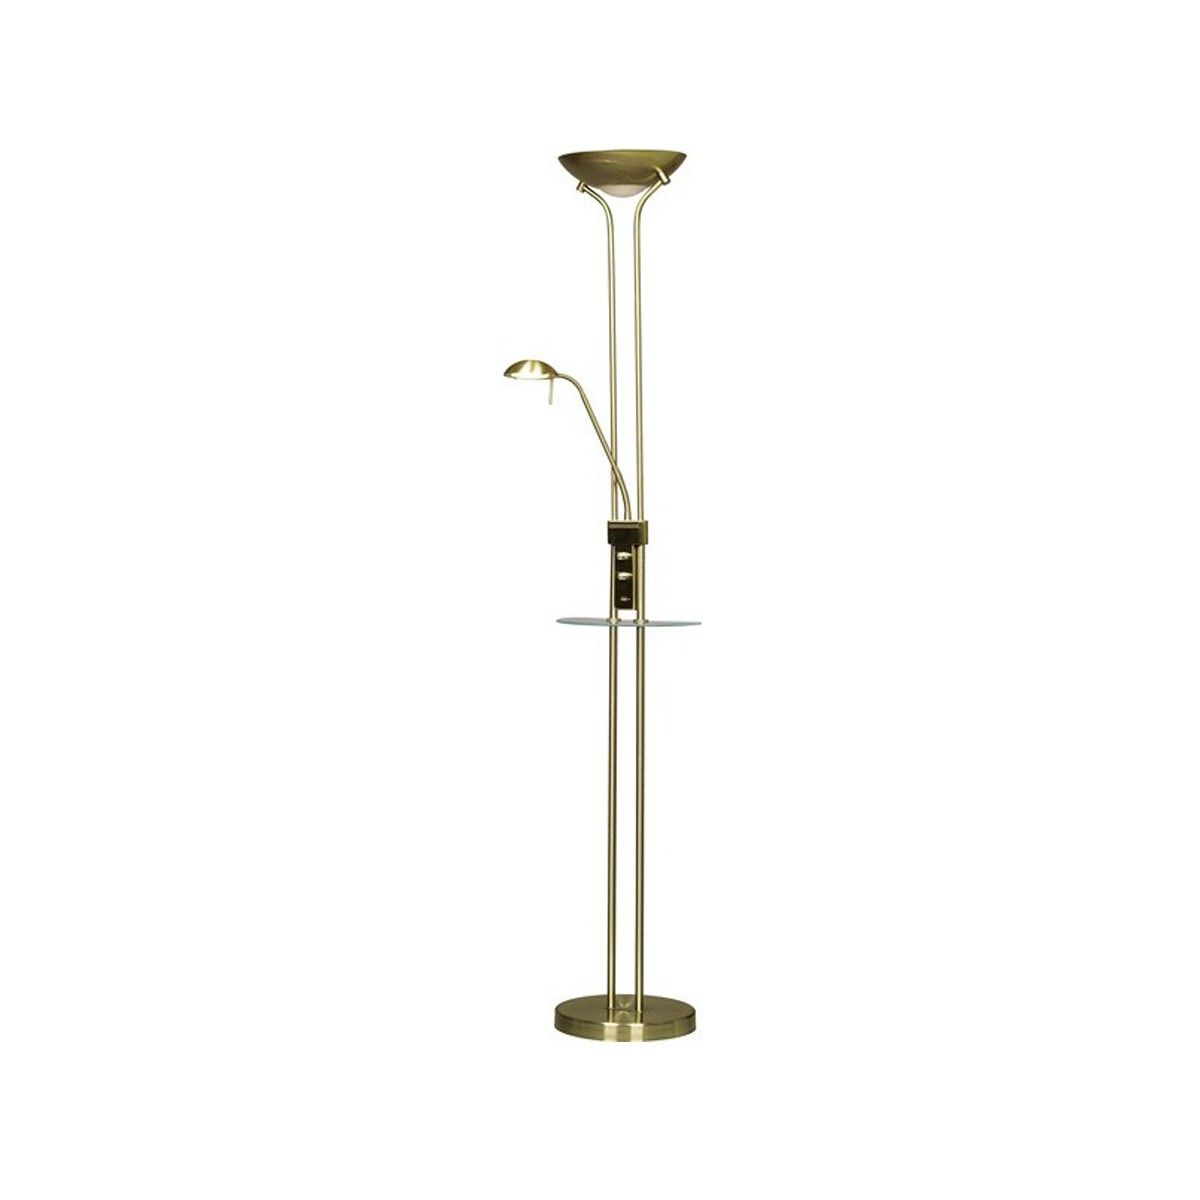 Alari Led Floor Lamp Antique Brass – Usb – Cristalrecord Spain For Floor Lamps With Usb (Gallery 20 of 20)